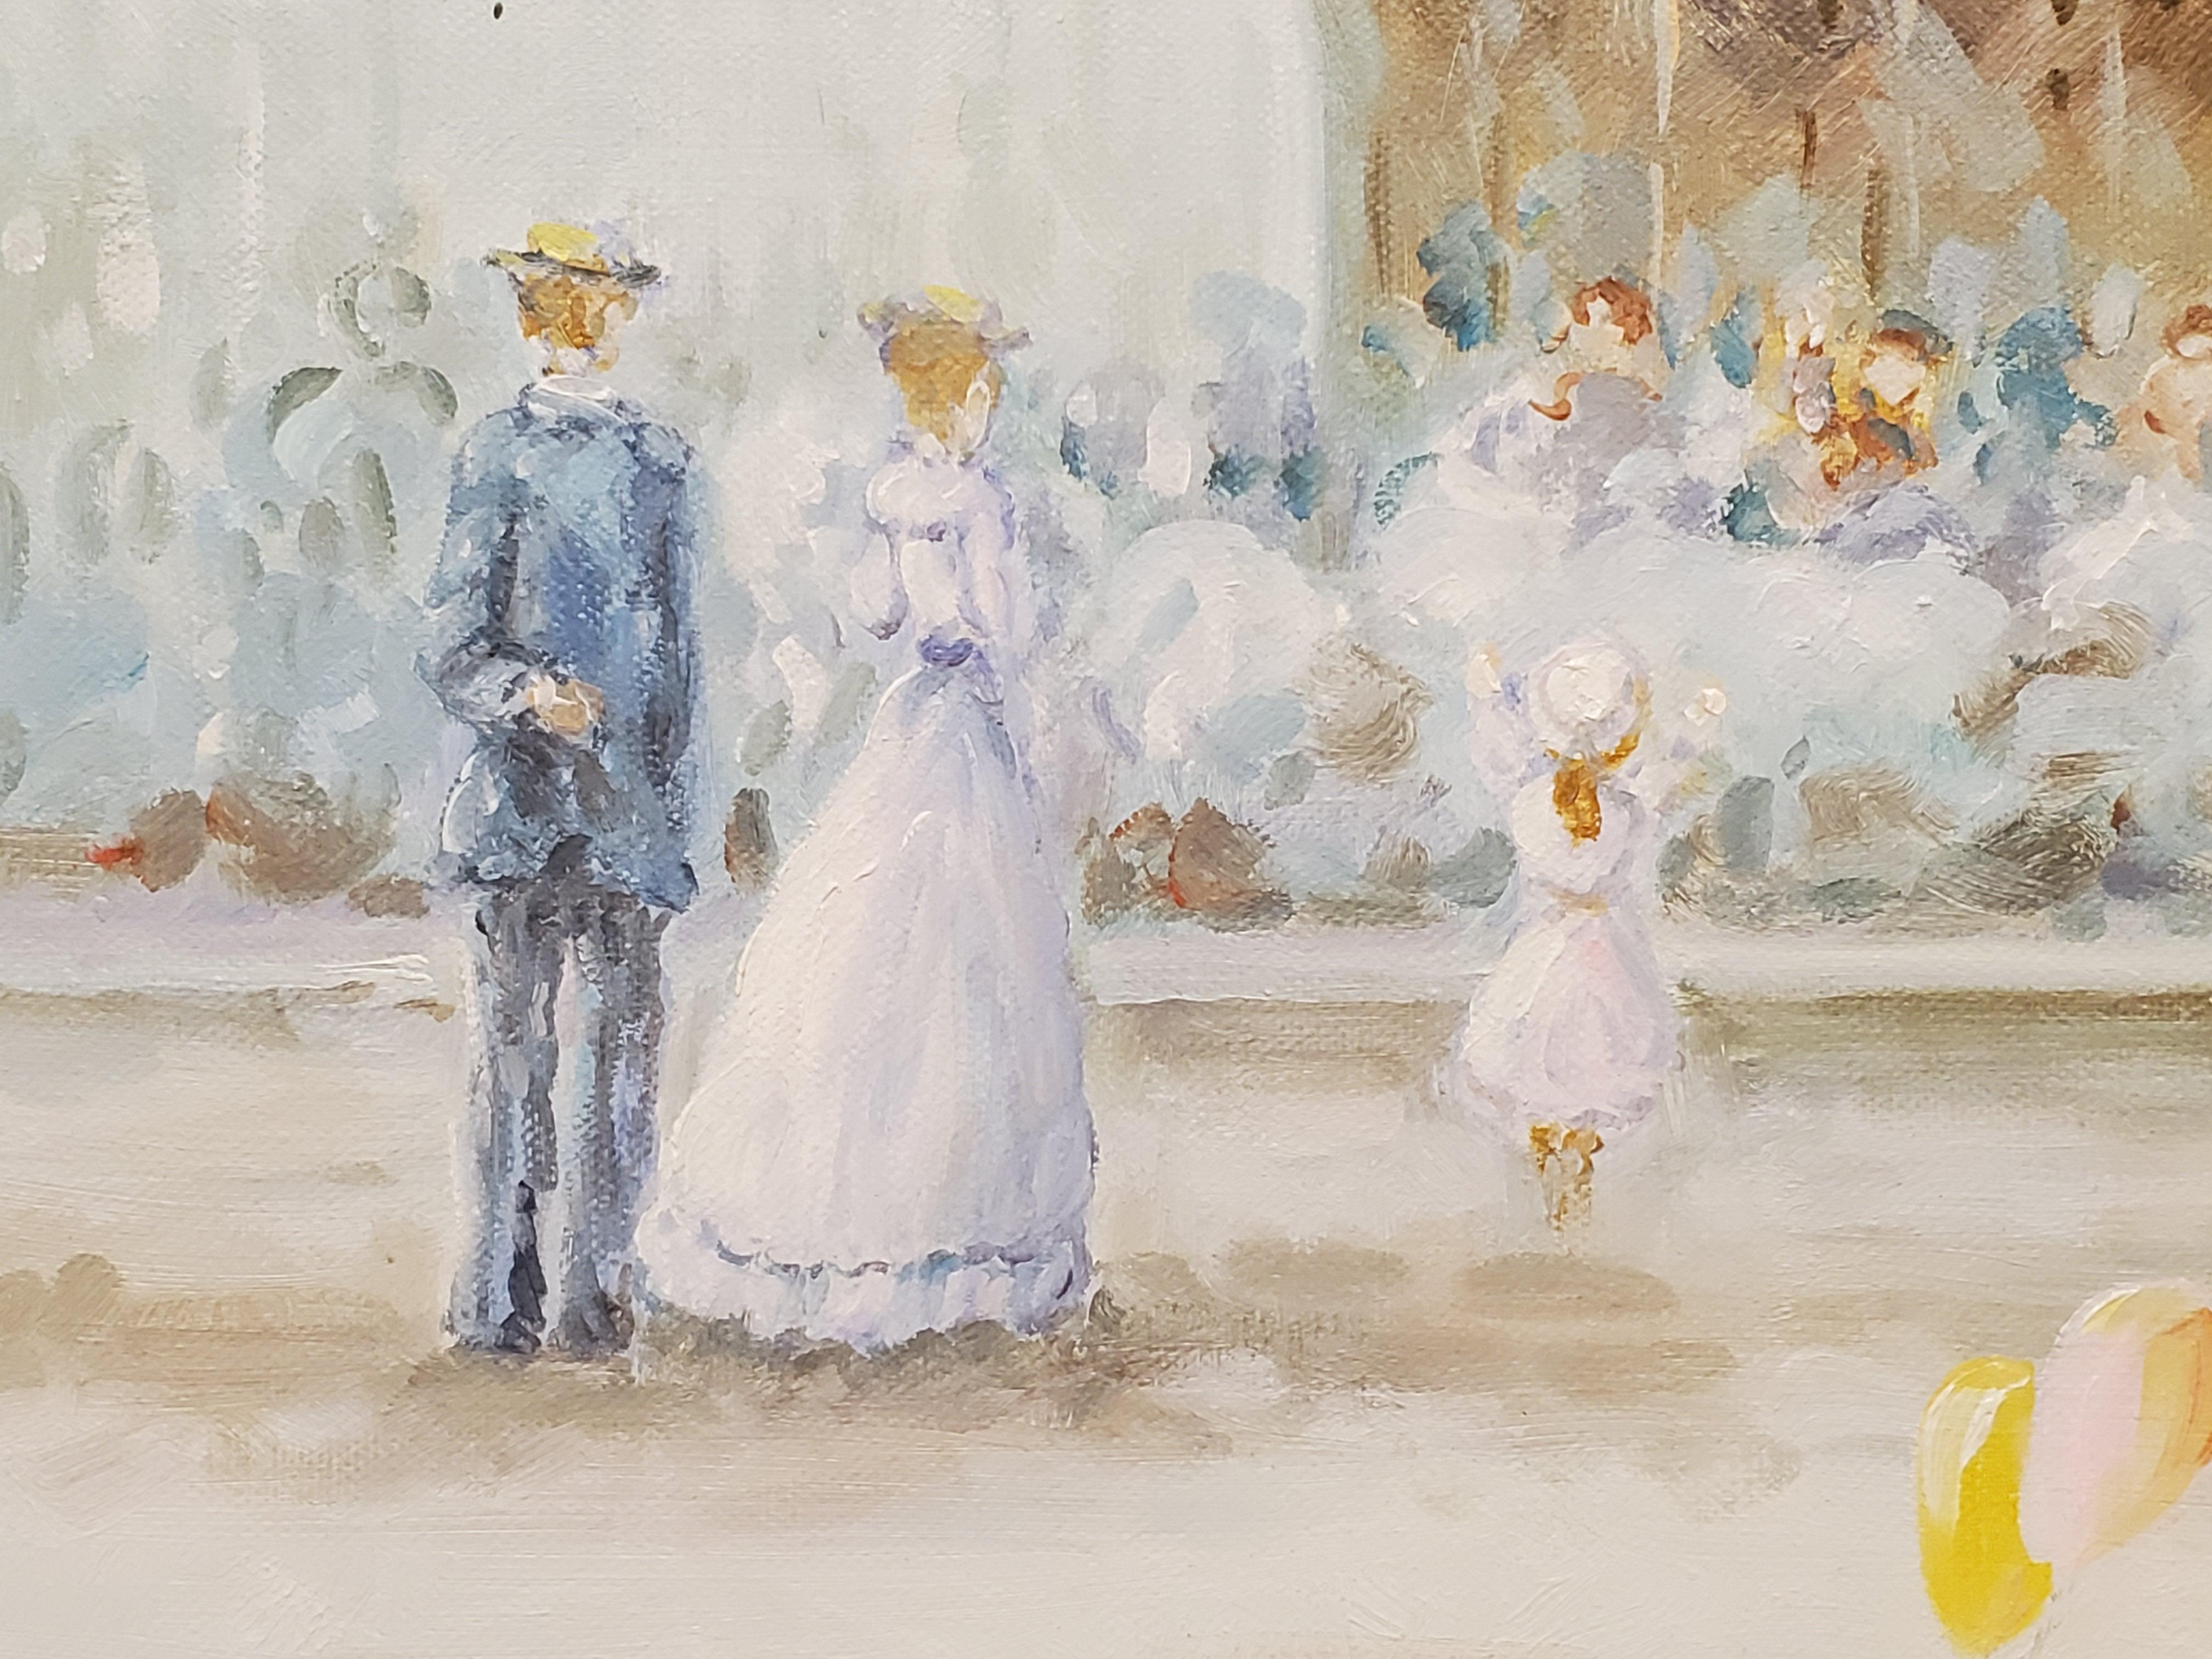 Families At The Carousel by J. Rey Huston 3